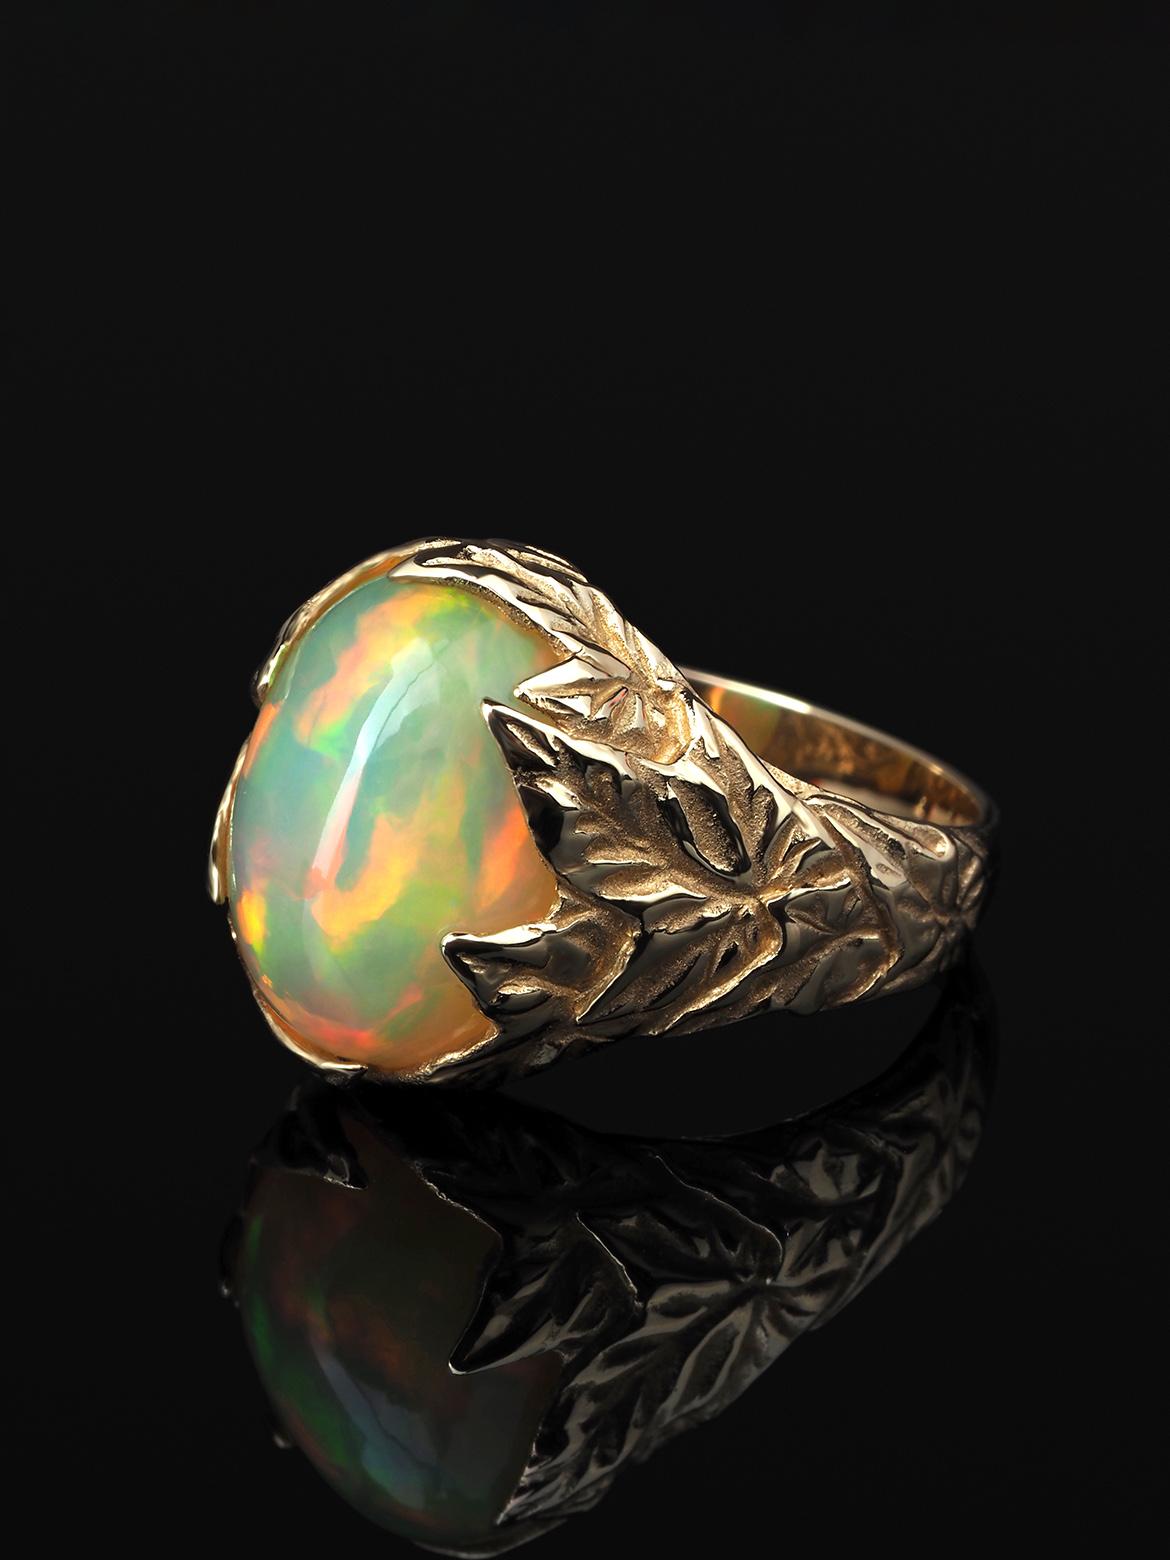 14k yellow gold ring with natural Opal
opal origin - Ethiopia 
opal measurements - 0.24 х 0.39 х 0.55 in / 6 х 10 х 14 mm
opal weight - 4.2 carats
ring size - 6.5 US
ring weight - 6.38 grams

Ivy collection


We ship our jewelry worldwide – for our